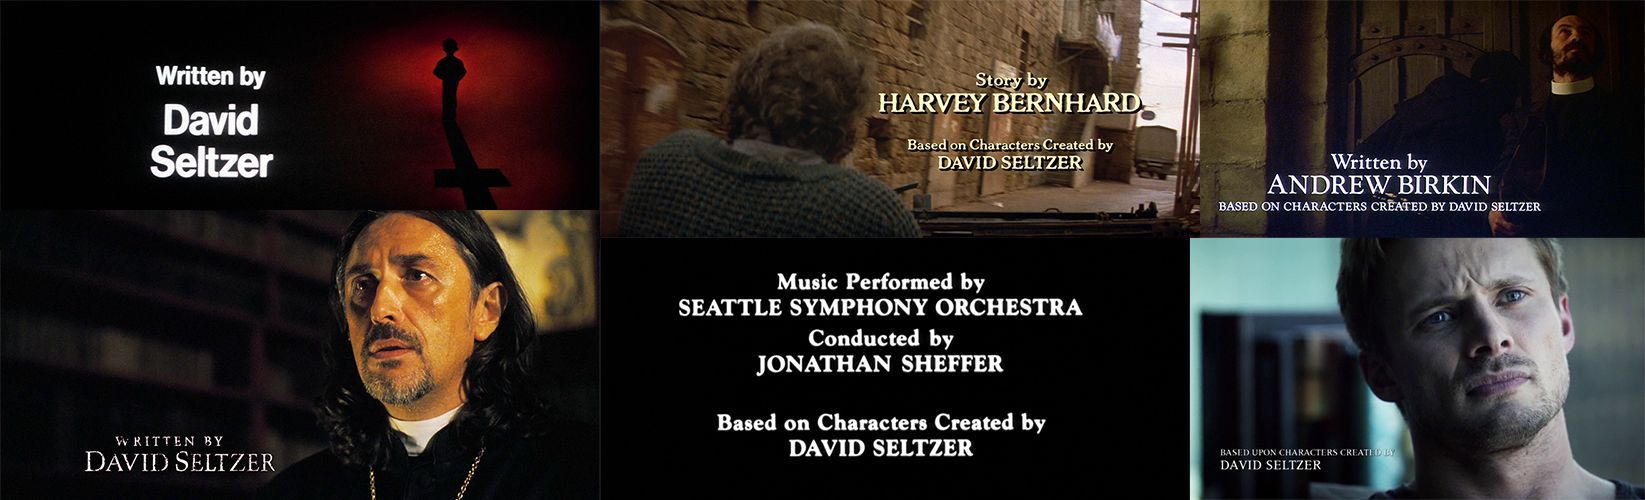 Screenshots of all Omen-related movies and TV shows featuring David Seltzer's on-screen credit.